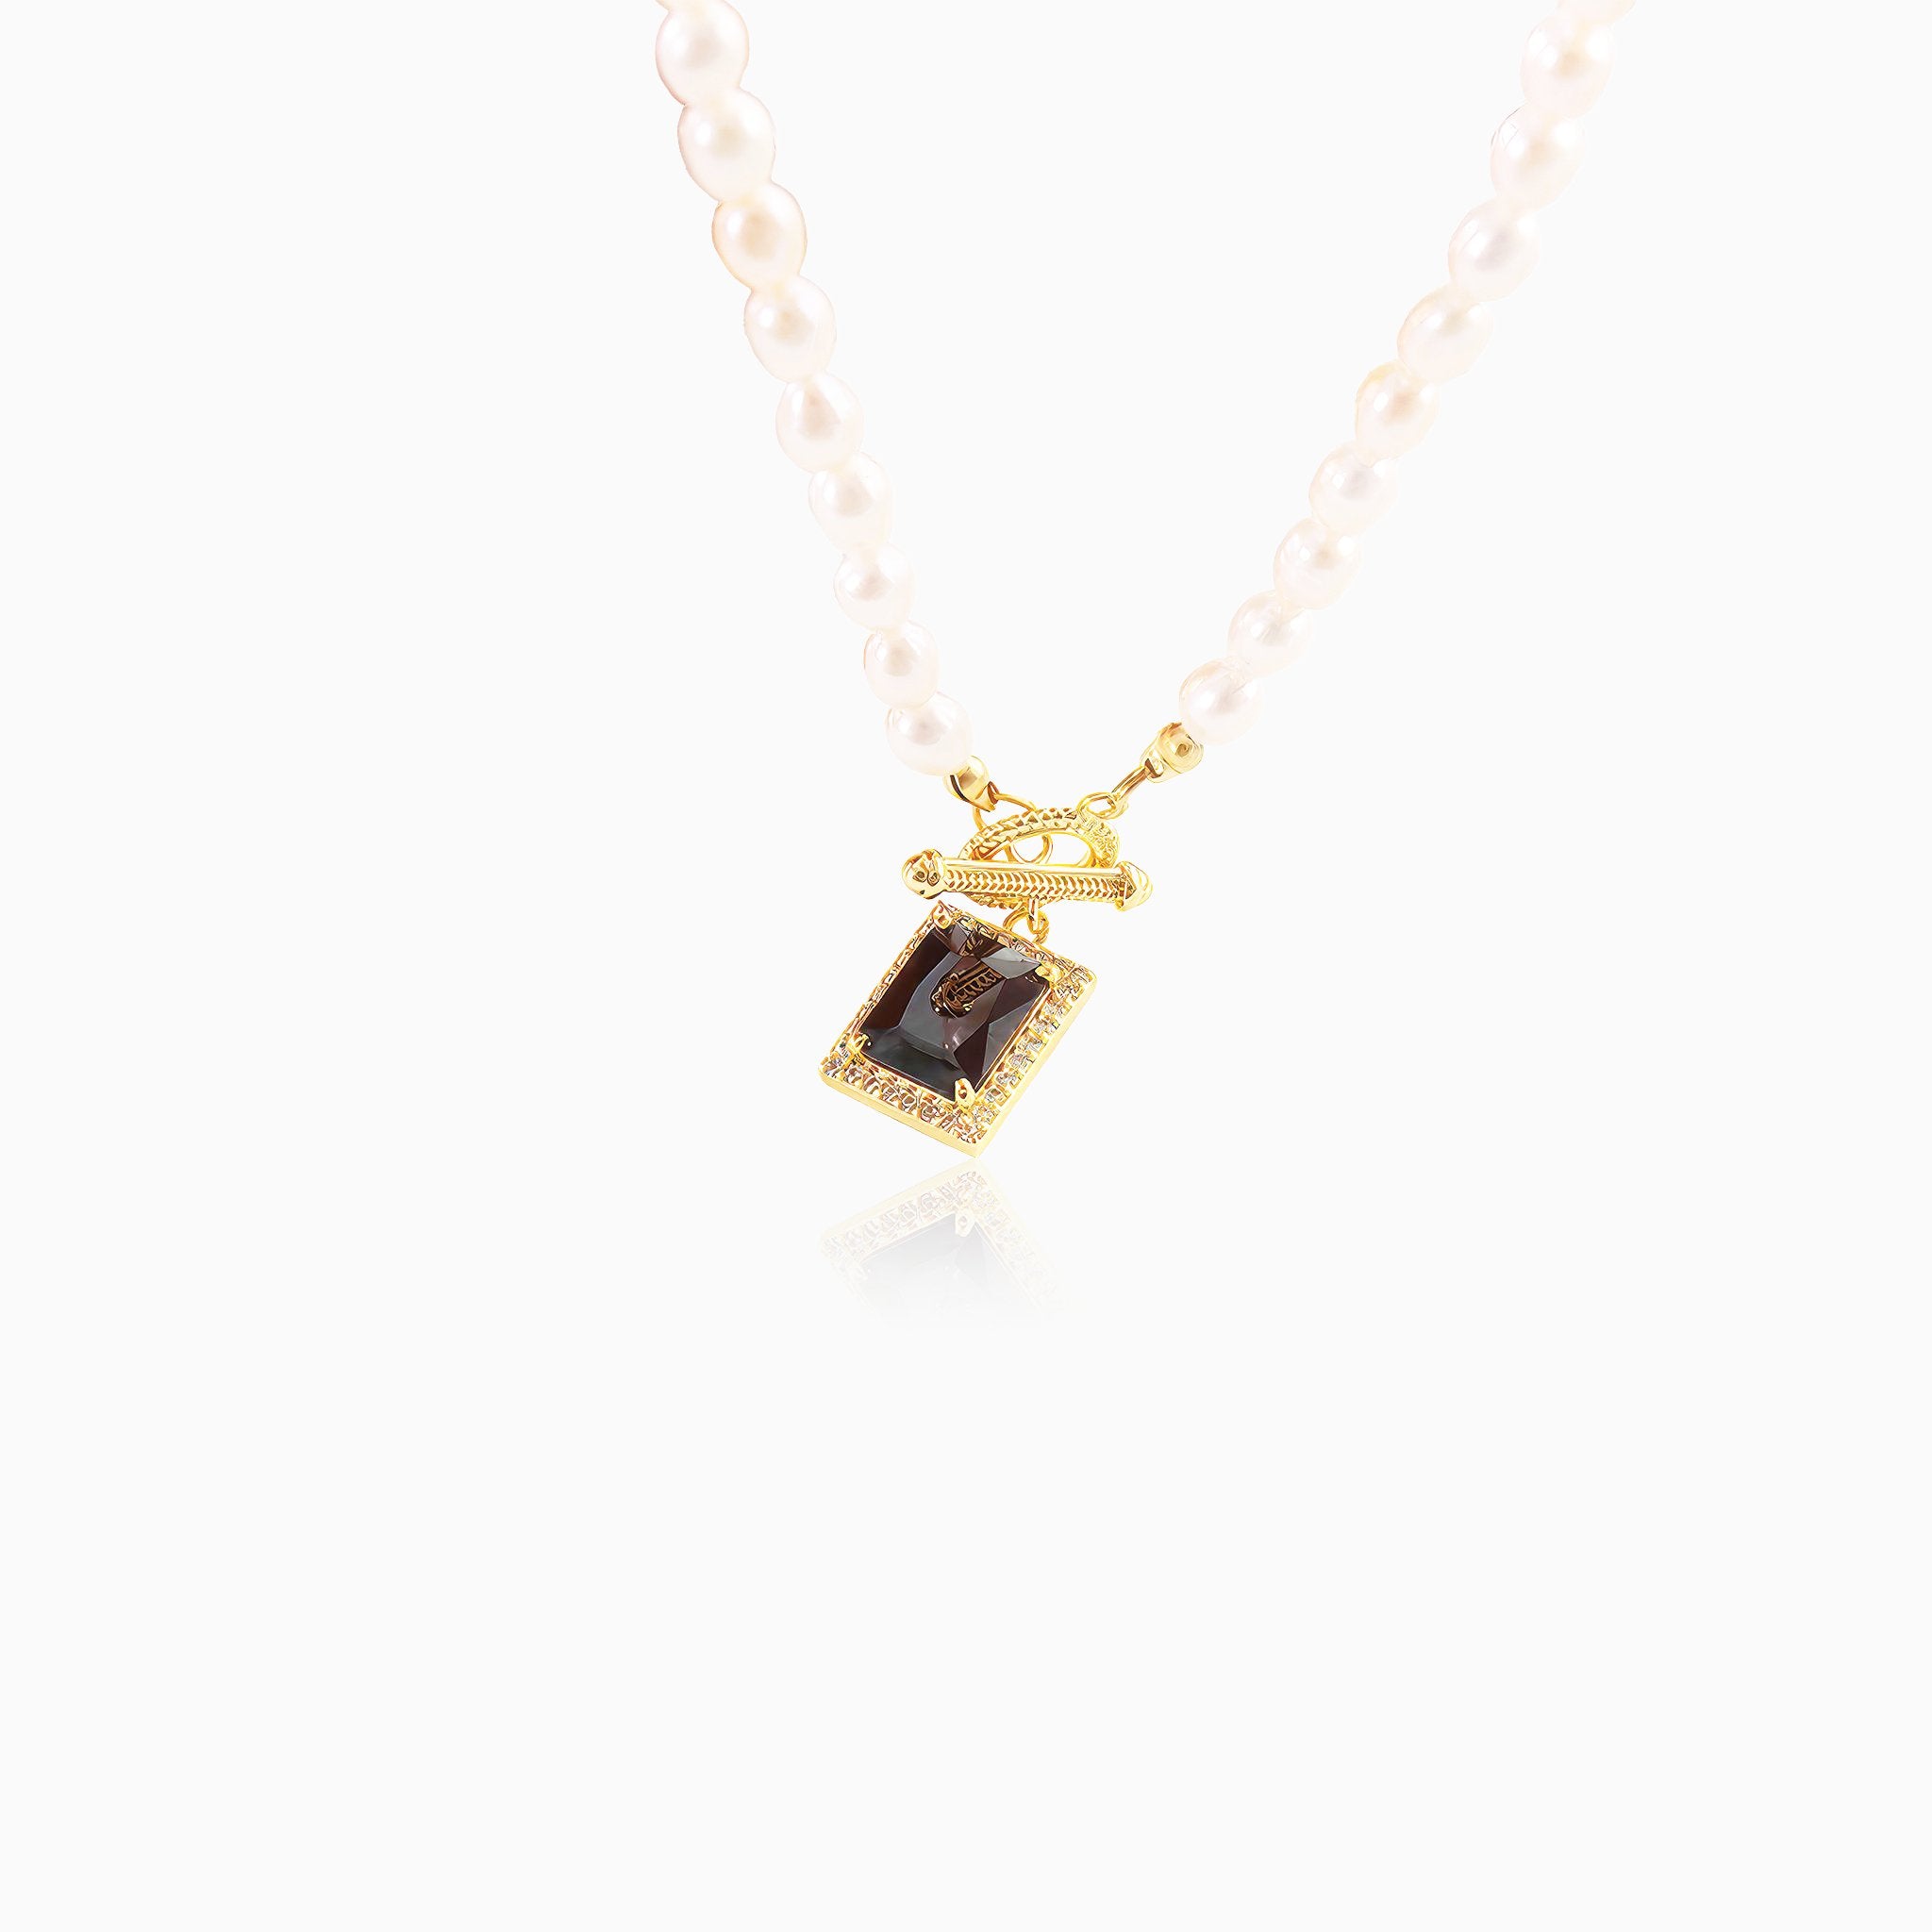 Pearl Chain Necklace with Square Gem Pendant - Nobbier - Necklace - 18K Gold And Titanium PVD Coated Jewelry